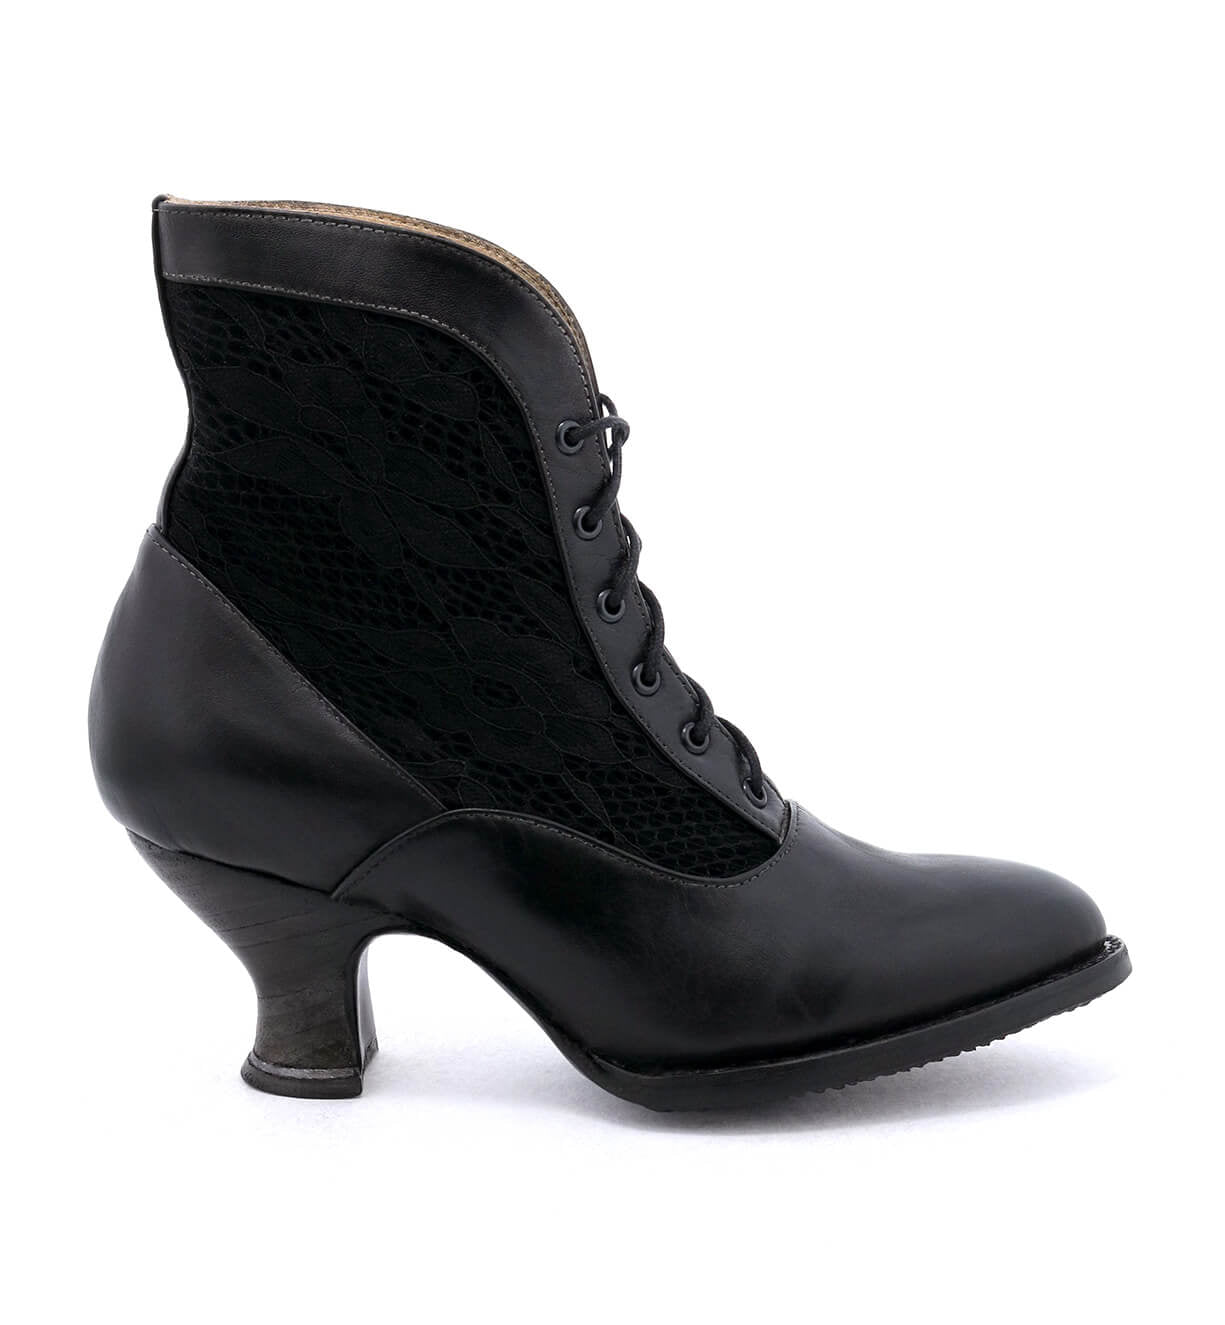 The Oak Tree Farms Jacquelyn ankle boot combines black rustic lace with a touch of romance for a stunning women's footwear option.